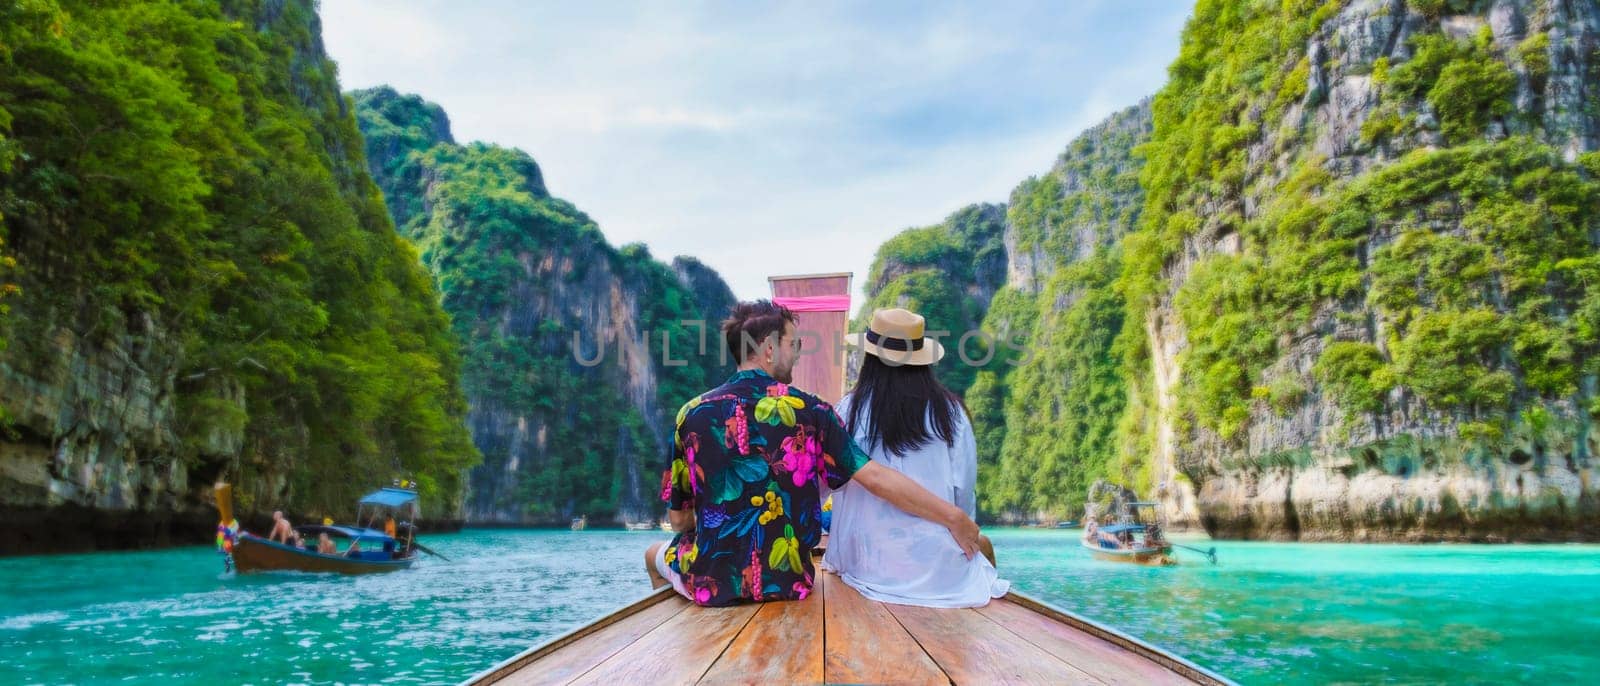 Thai women and Caucasian men in front of a Longtail boat at the lagoon of Koh Phi Phi Thailand. Pileh Lagoon Thailand Koh Phi Phi Krabi on a summer day